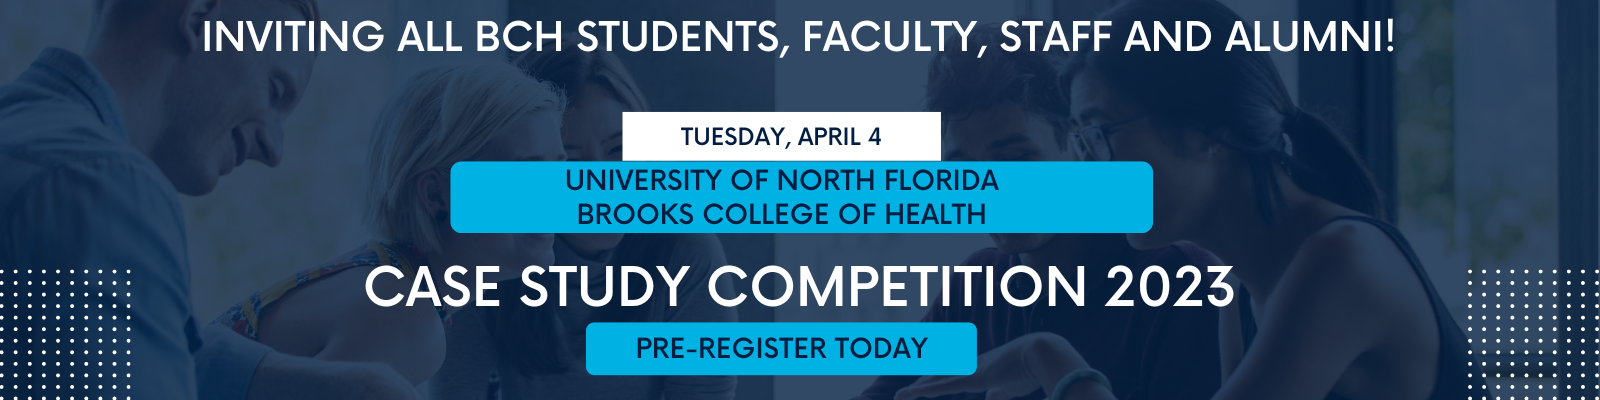 BCH Case study competition, Tue. April 4, UNF pre-register today.